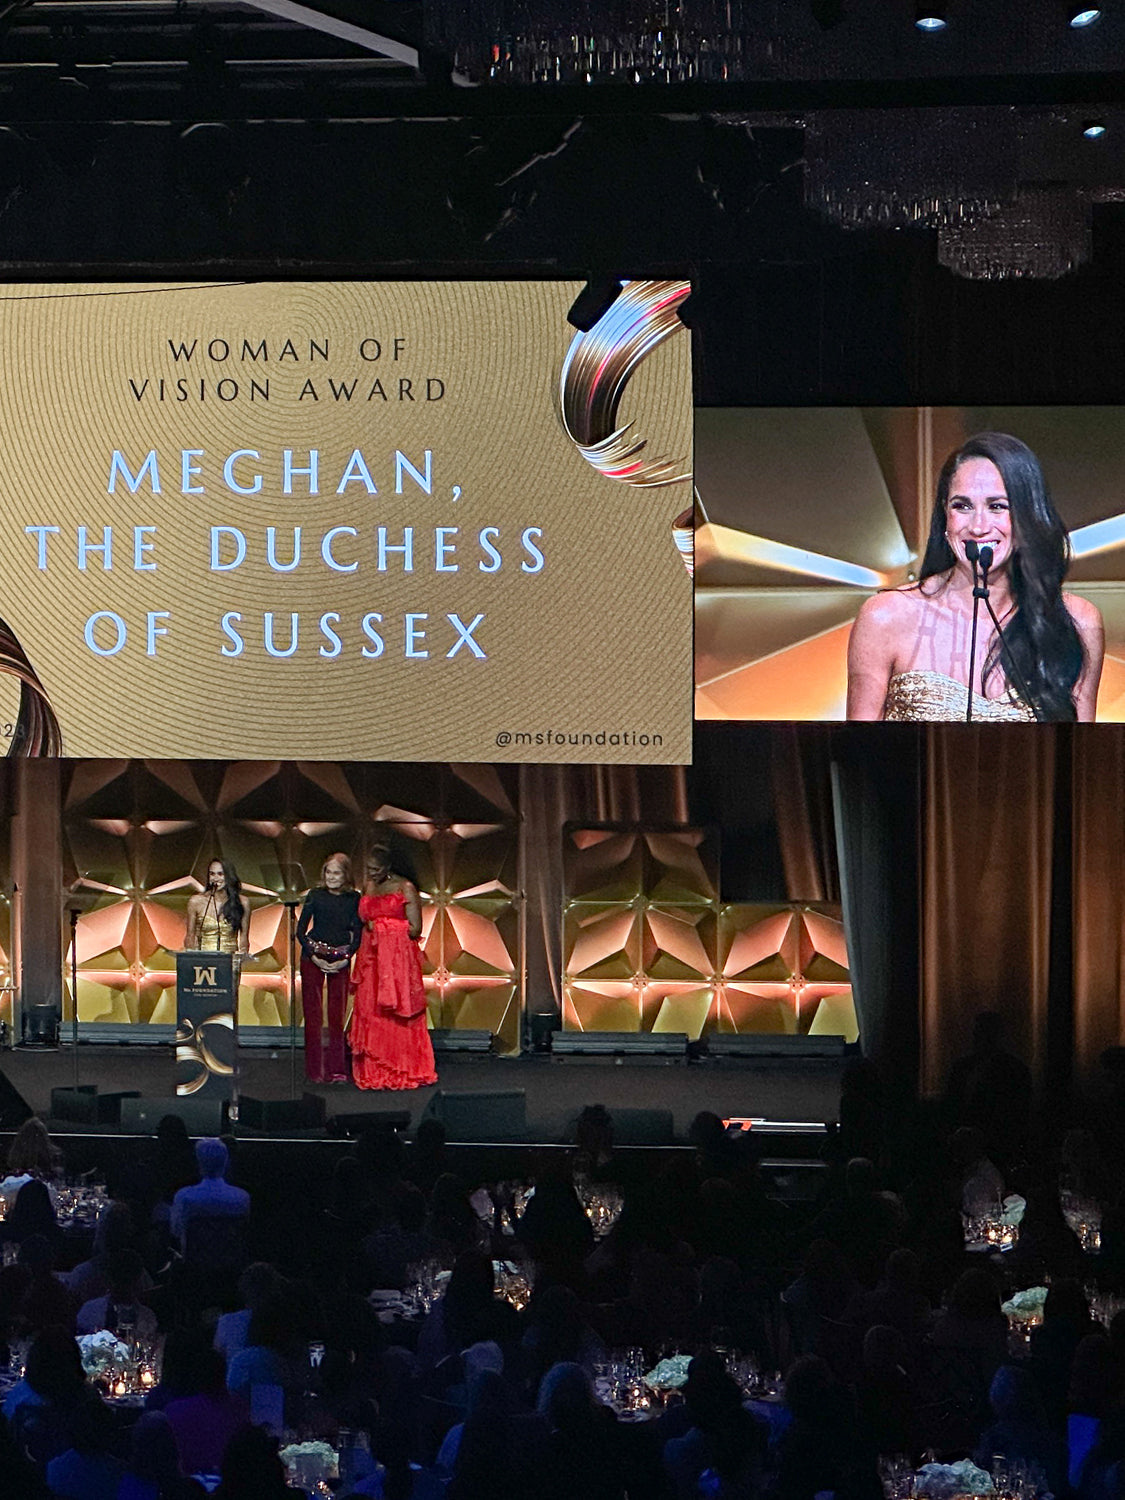 meghan, duchess of sussex on stage speaking at the ms foundation gala